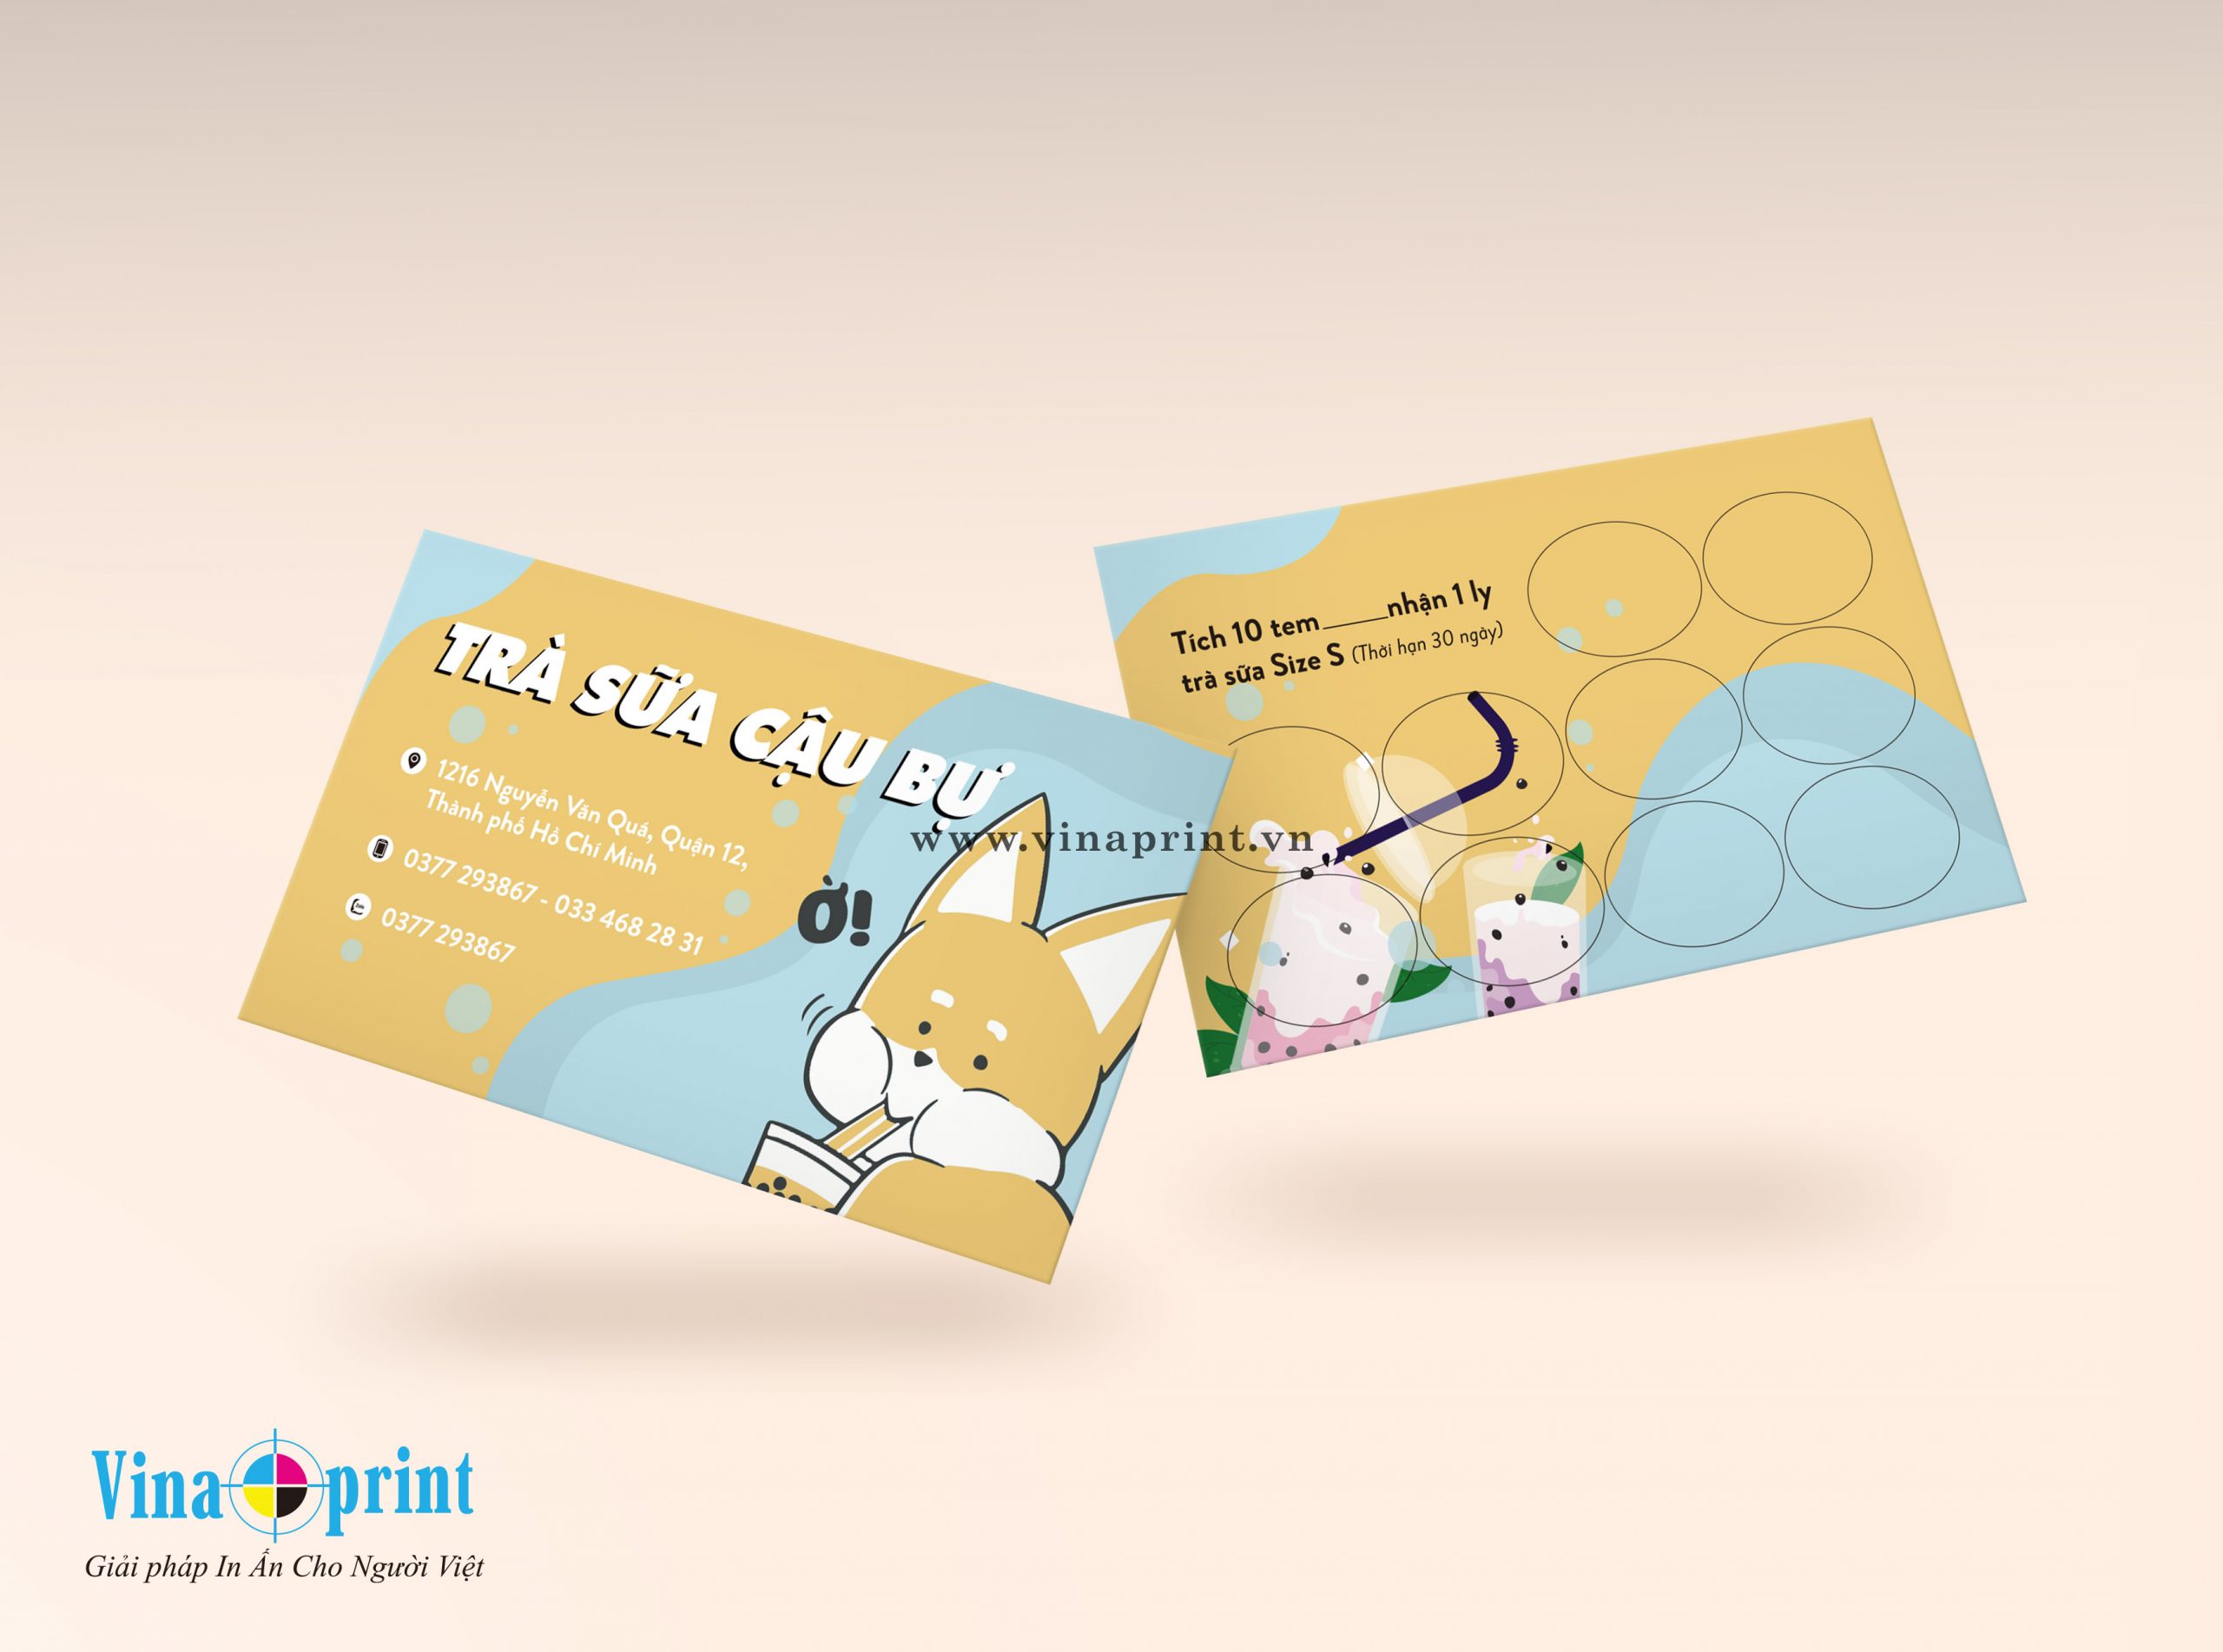 Business Card Sizes - Best Tips & Specs for Visiting Card Sizes